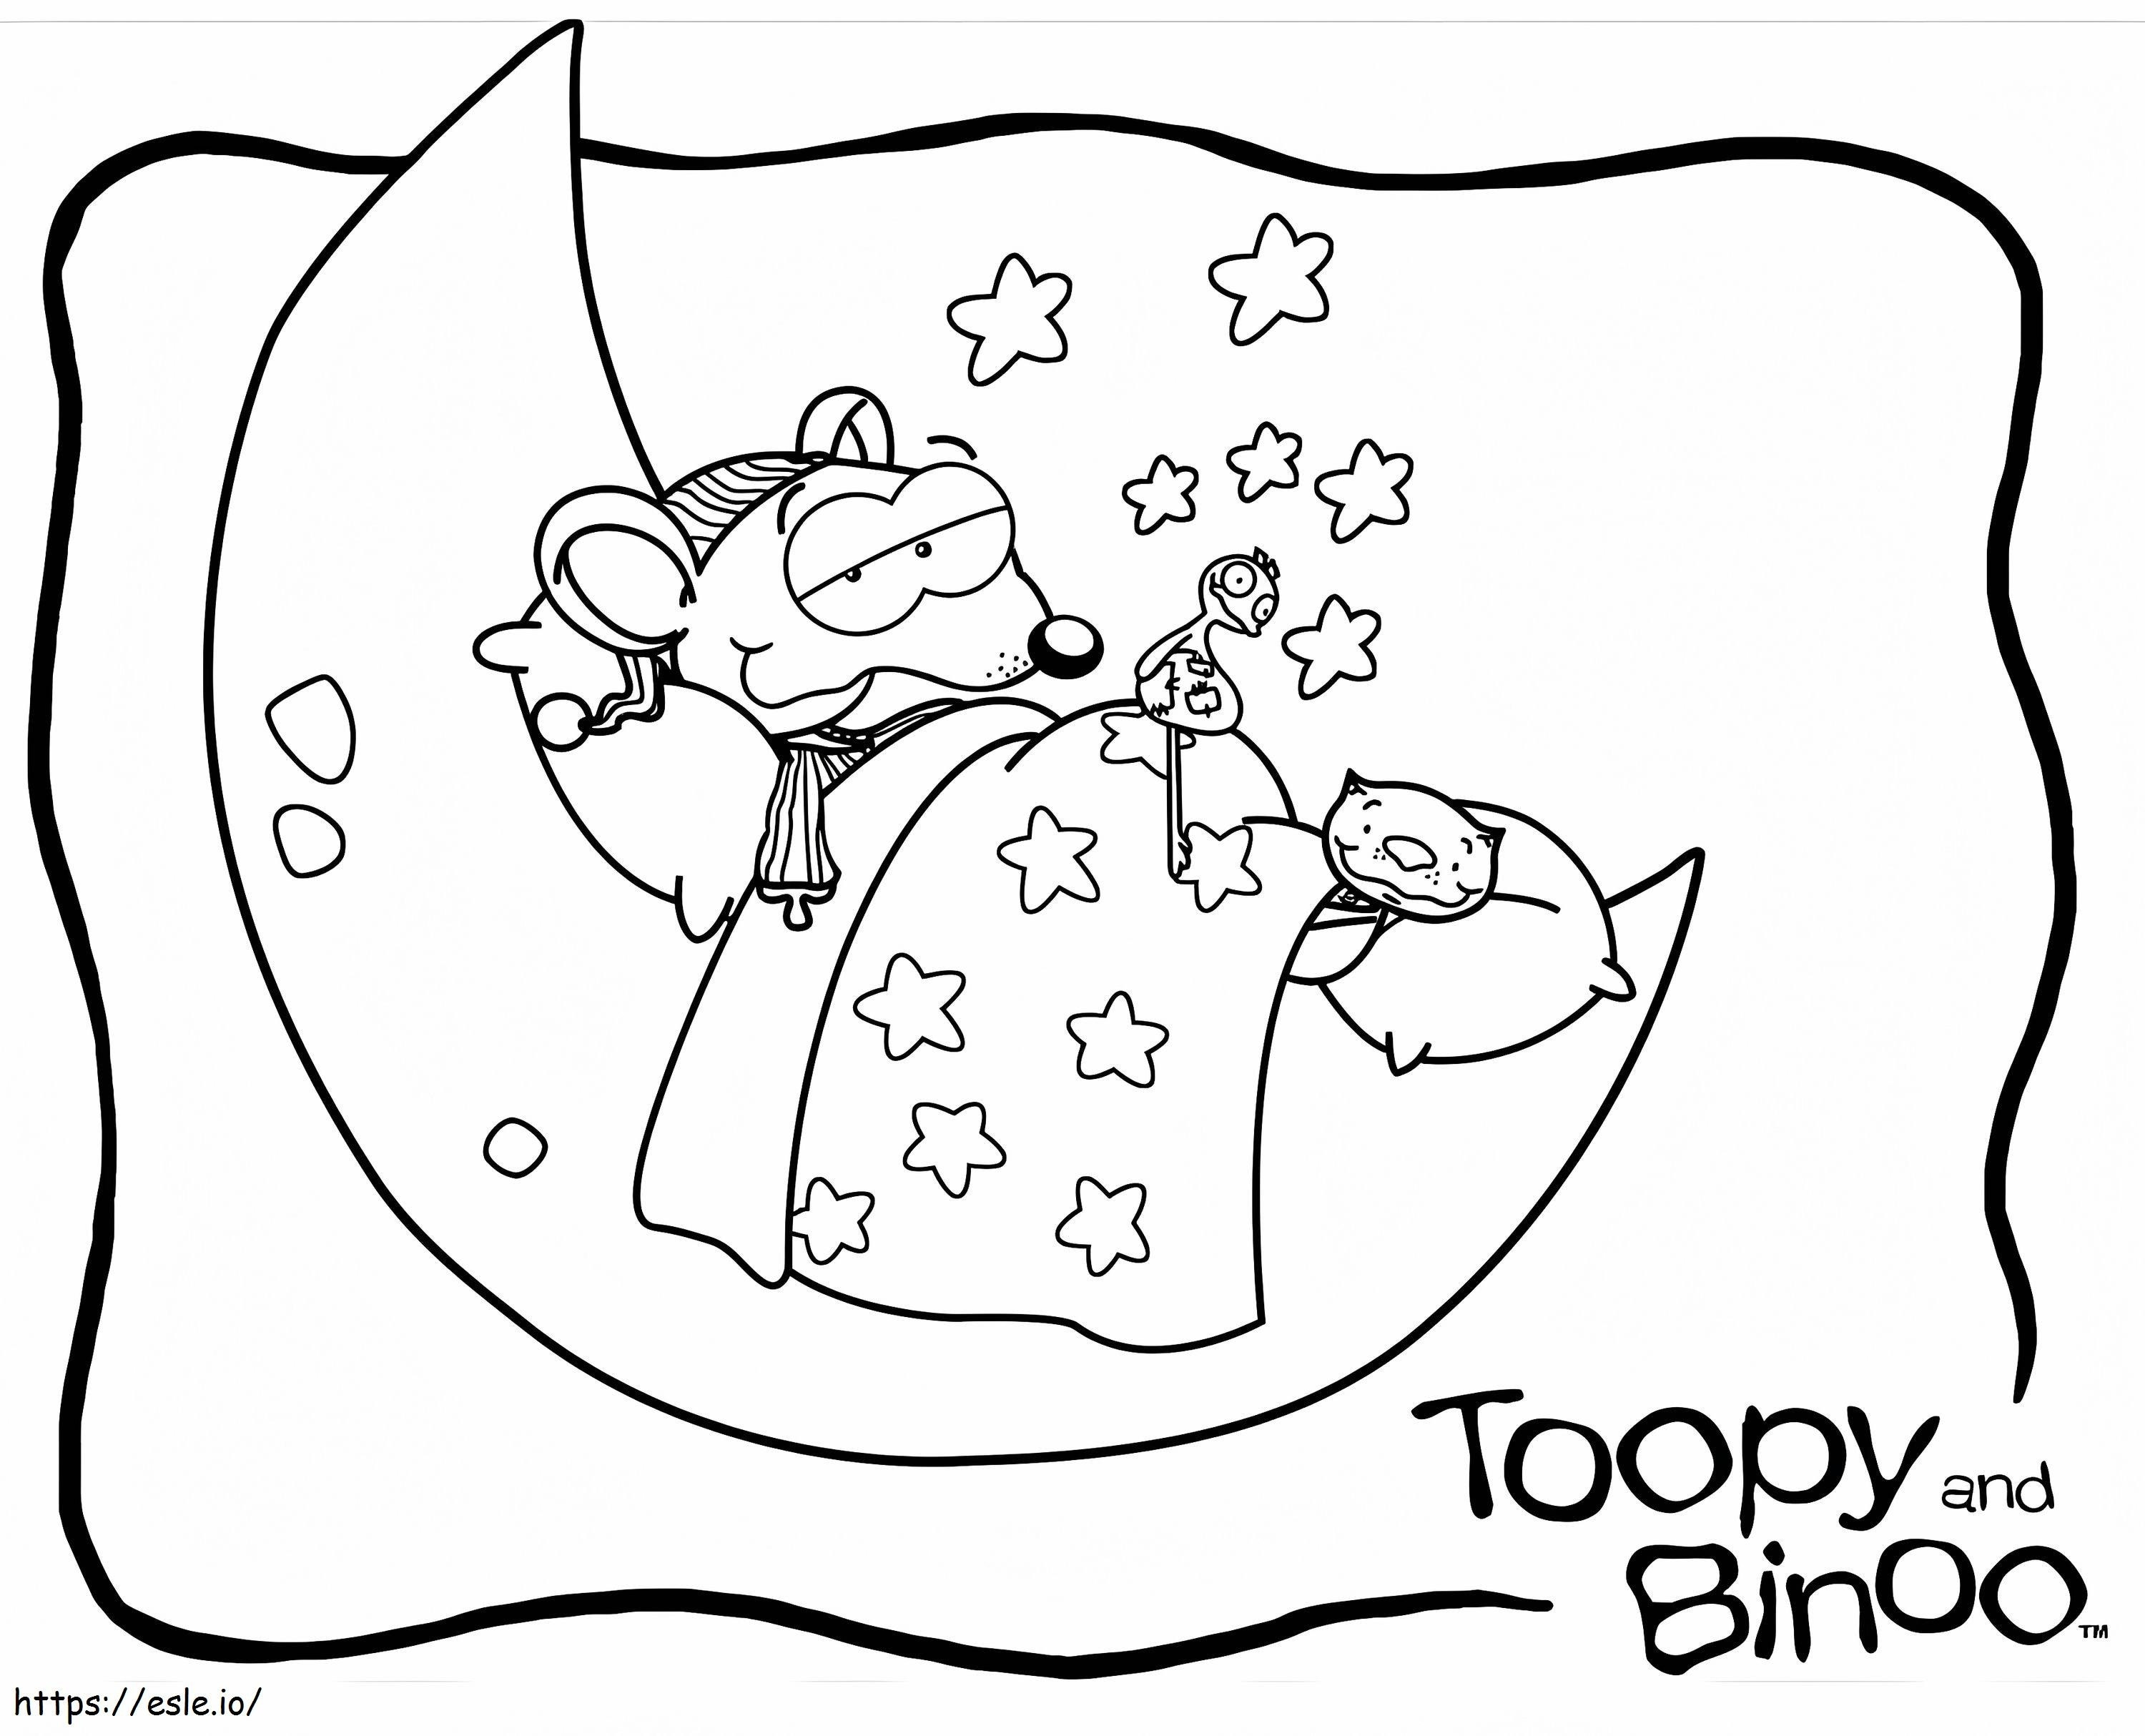 Toopy And Binoo Go Sleeping coloring page